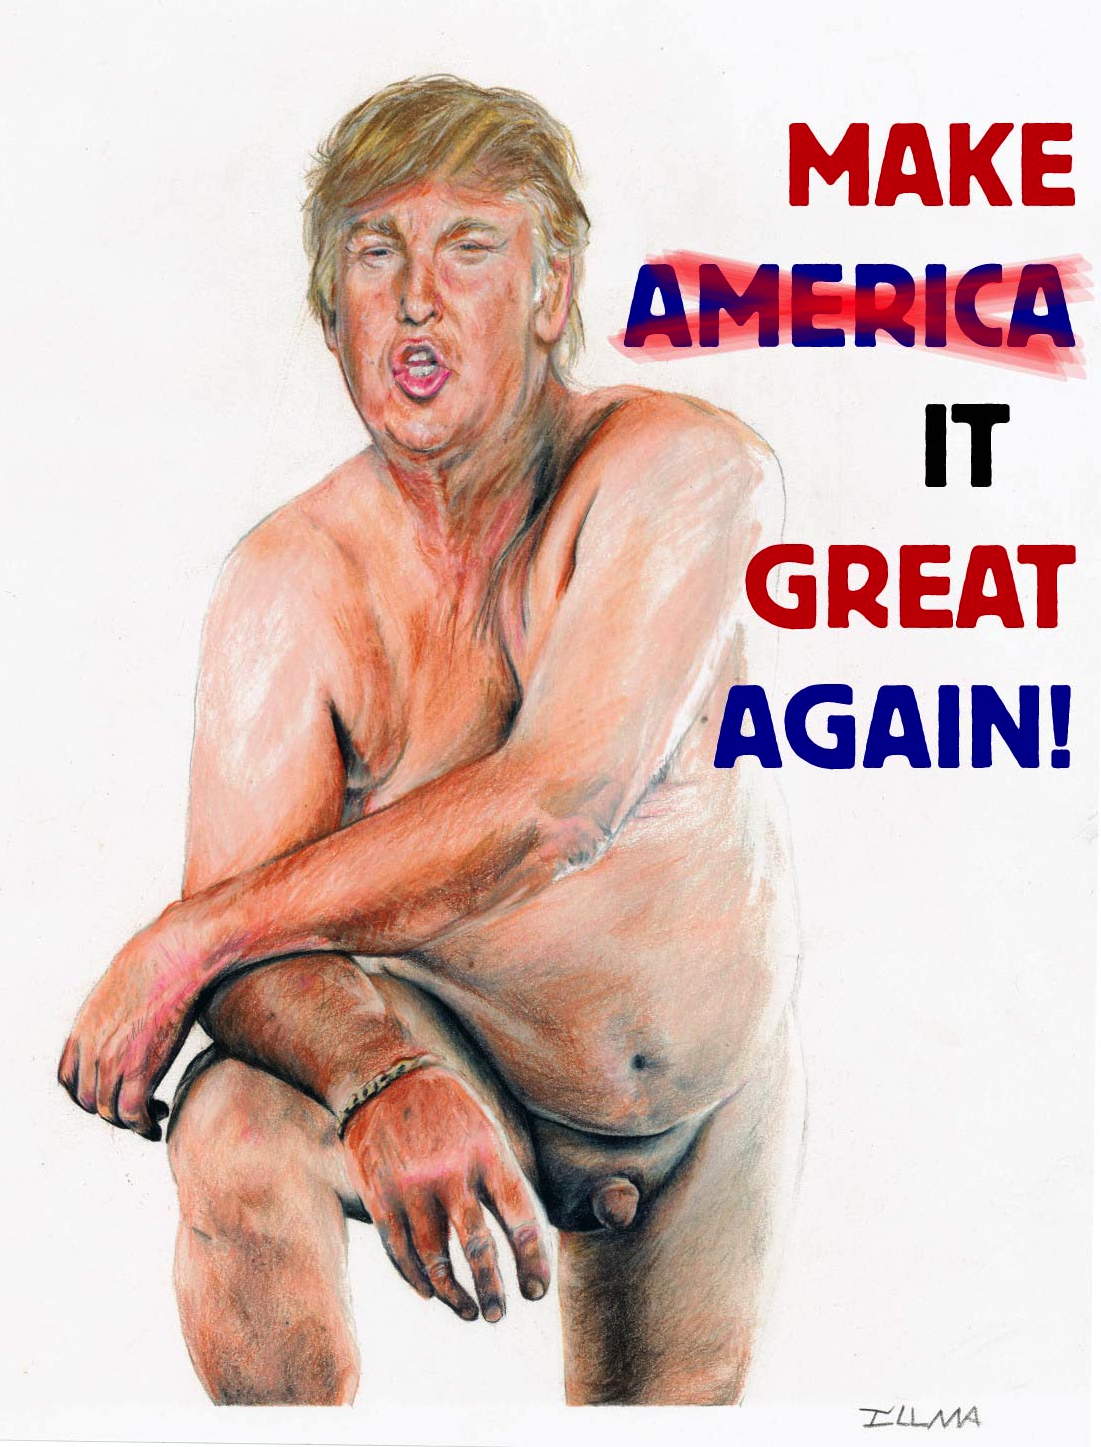 Donal Trump slogan Make America or IT great again little naked